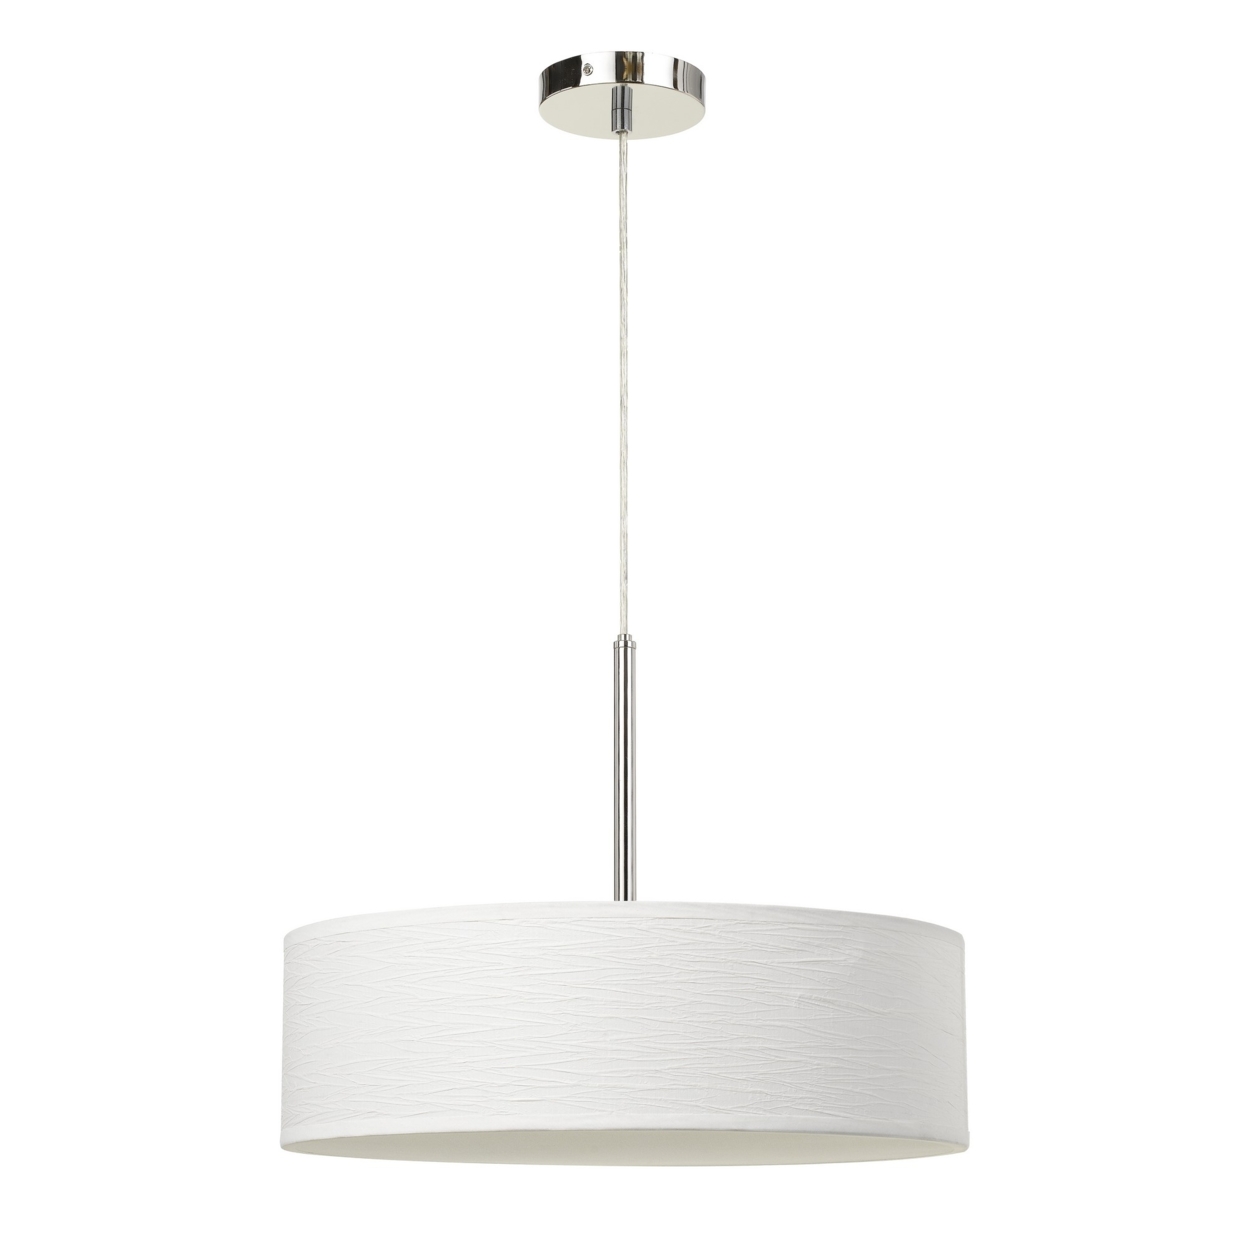 Integrated LED Dimmable Pendant Lighting With Fabric Drum Shade, Silver- Saltoro Sherpi